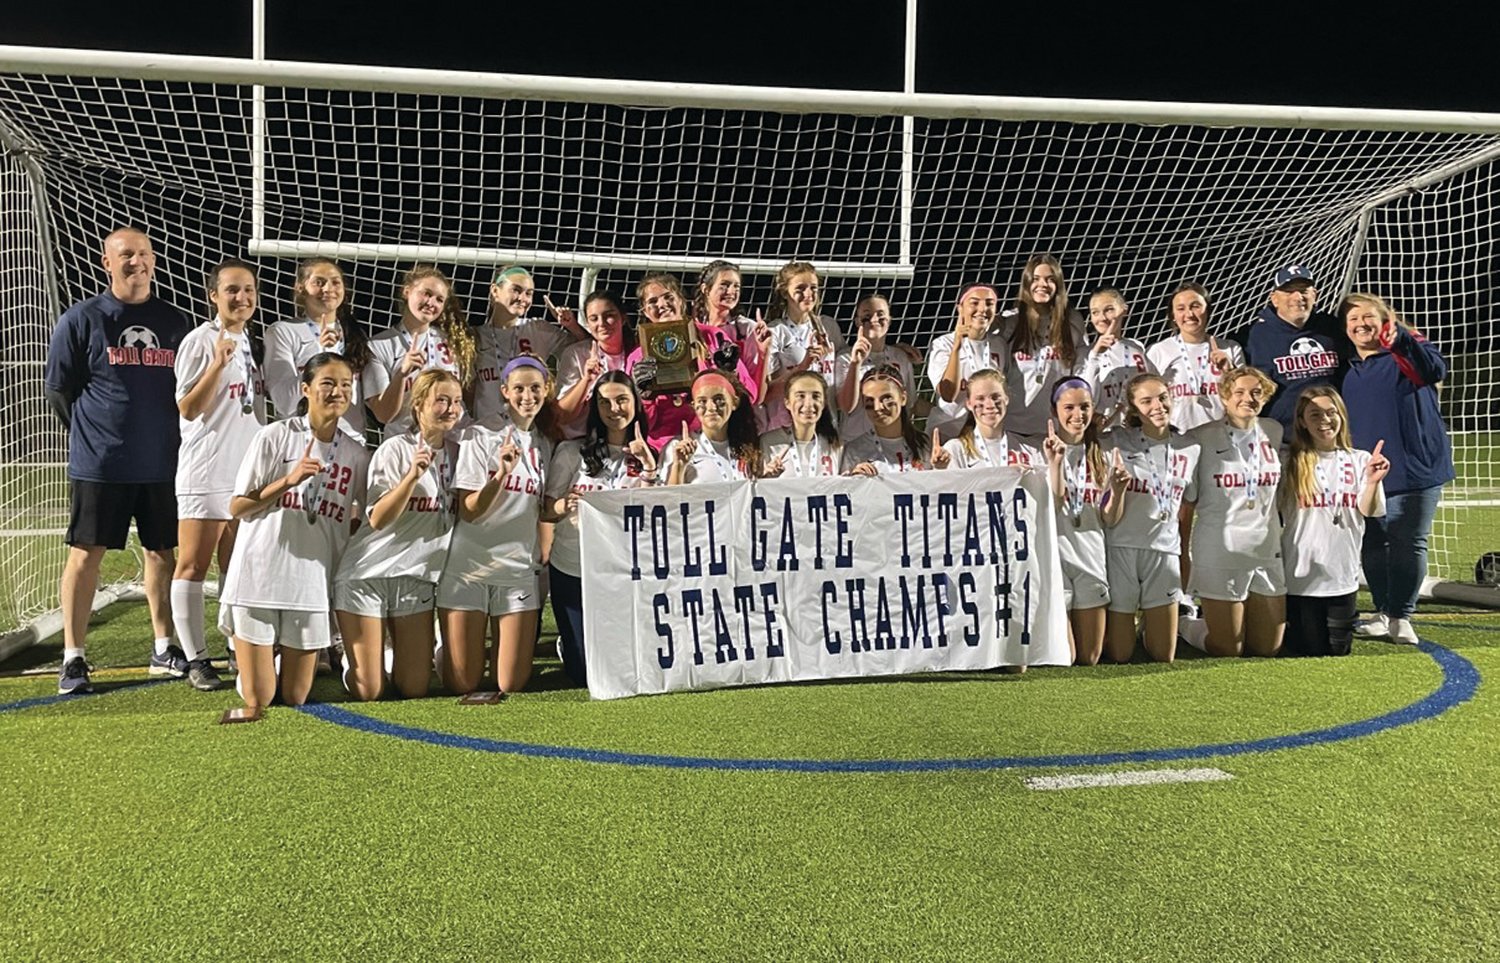 STATE CHAMPS: The Toll Gate girls soccer team after winning the Division III State Championship last week against Westerly. (Photos by Ryan D. Murray)